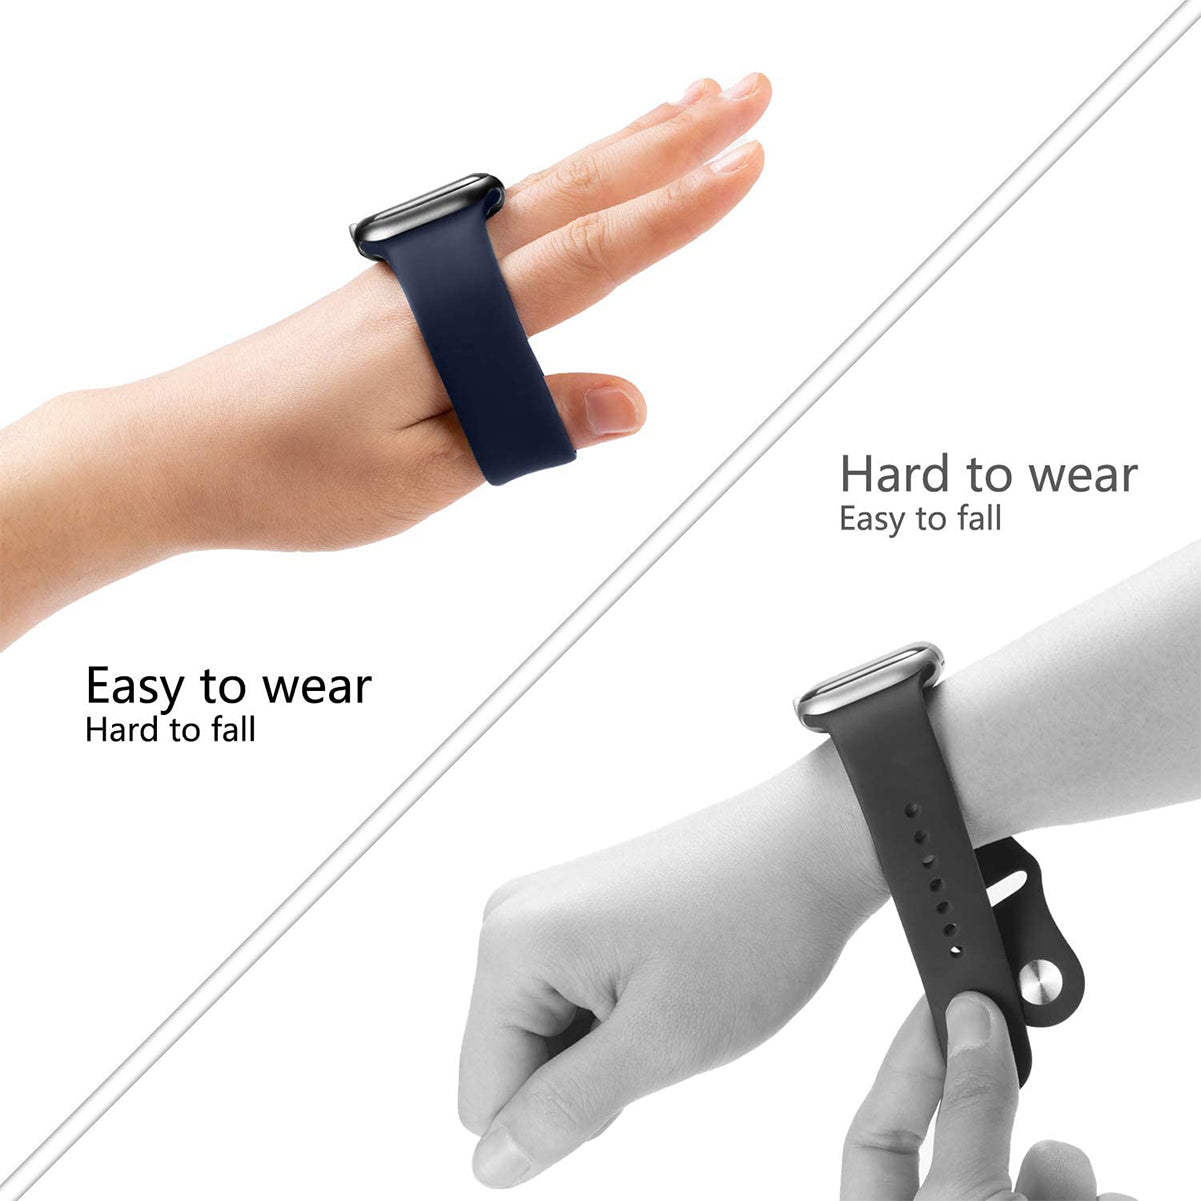  Qimela Stretchy Solo Loop Compatible with Apple Watch